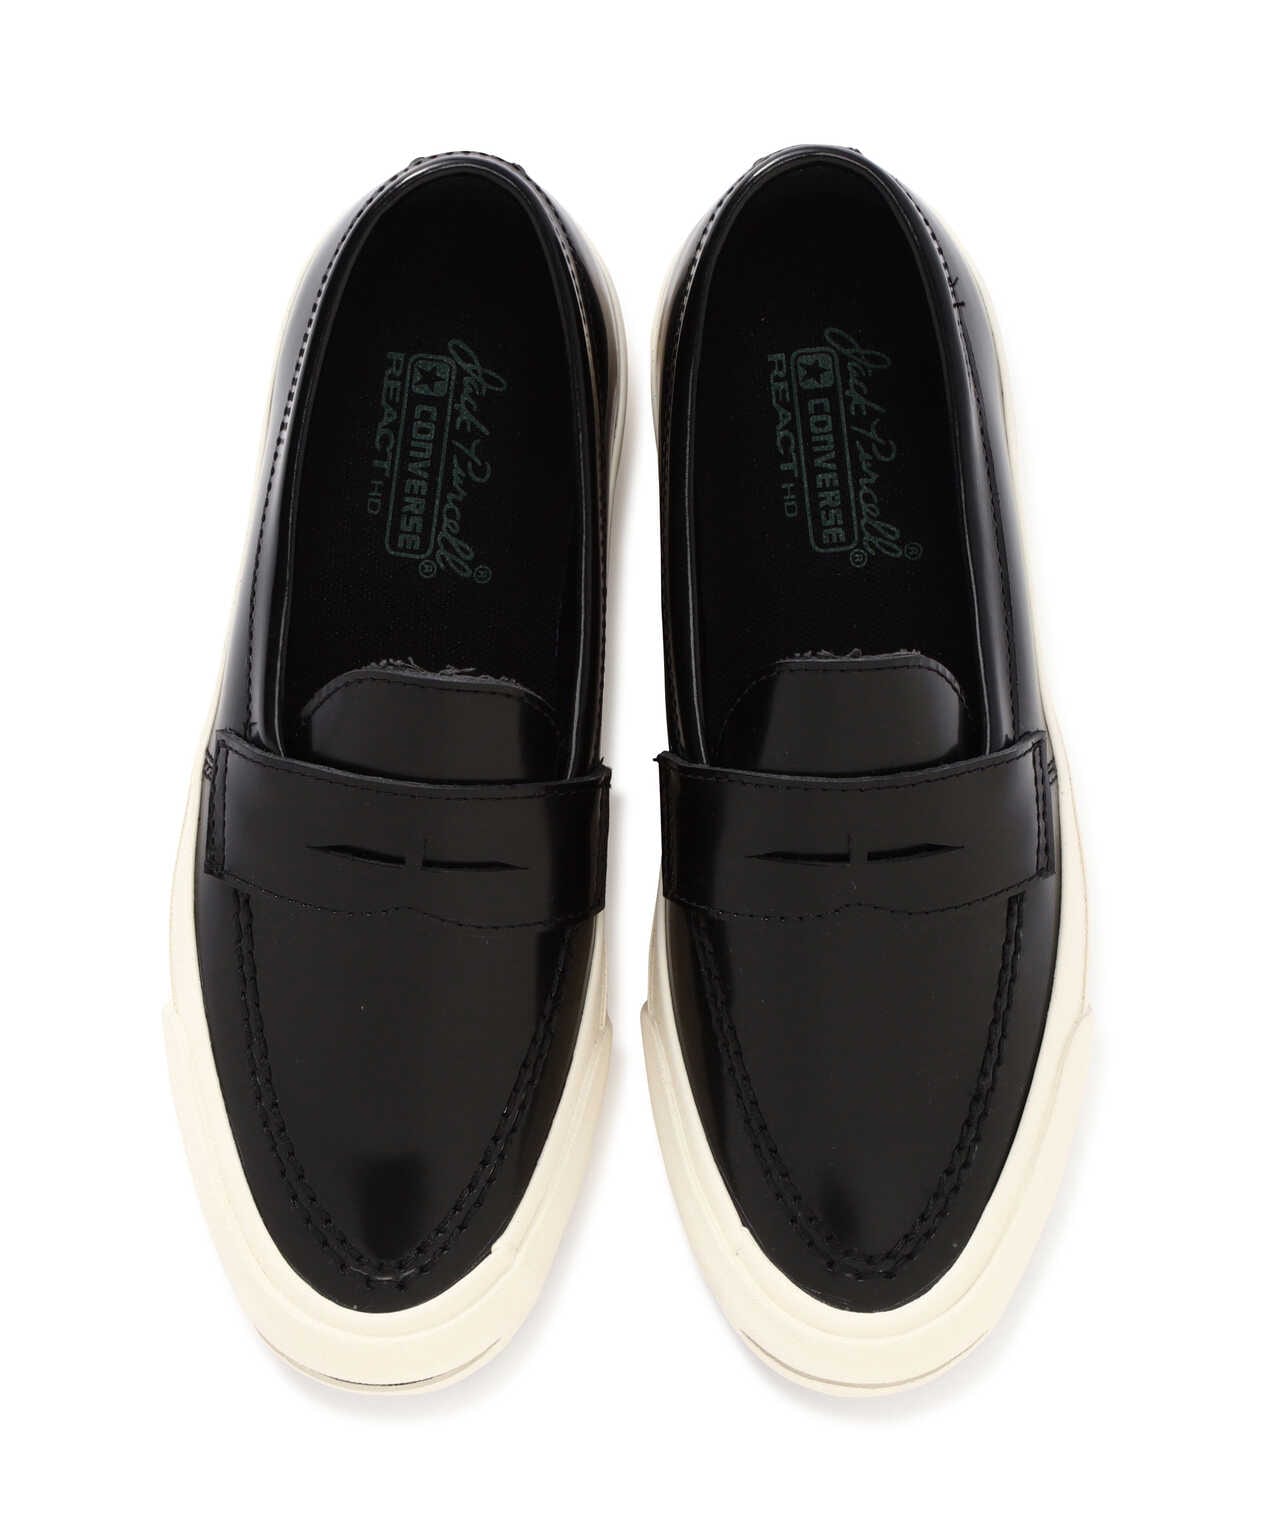 CONVERSE/コンバース/JACK PURCELL LOAFER RH/W